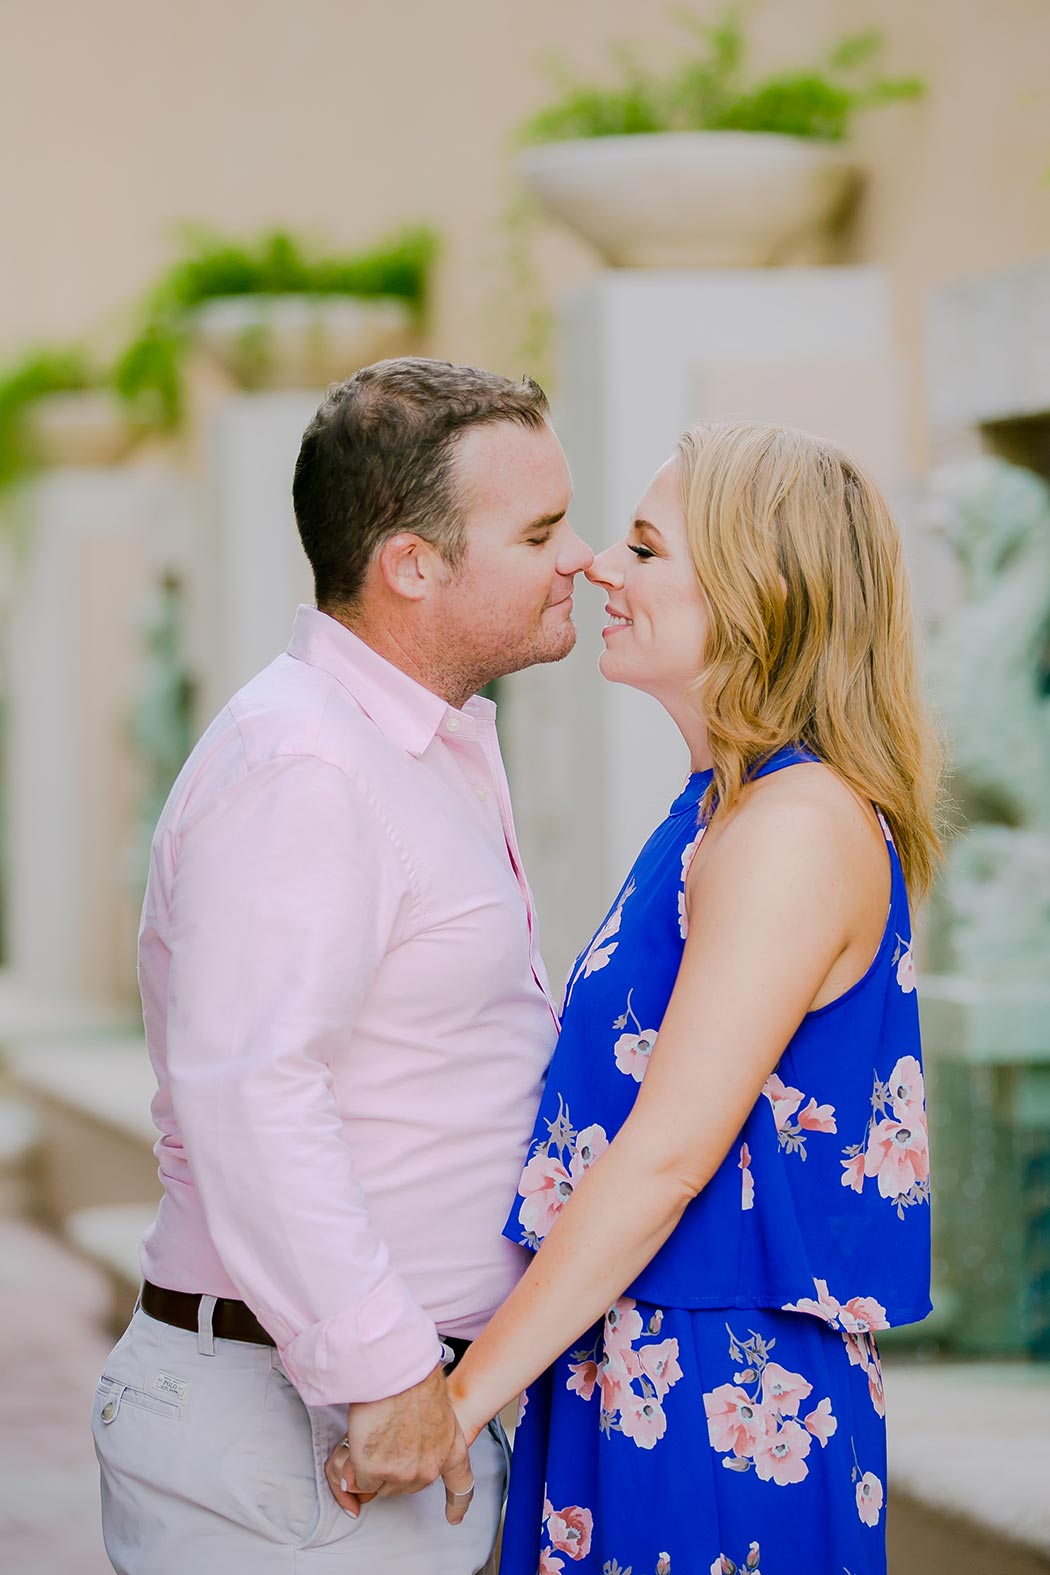 couple's Eskimo kisses engagement photography session in fort lauderdale